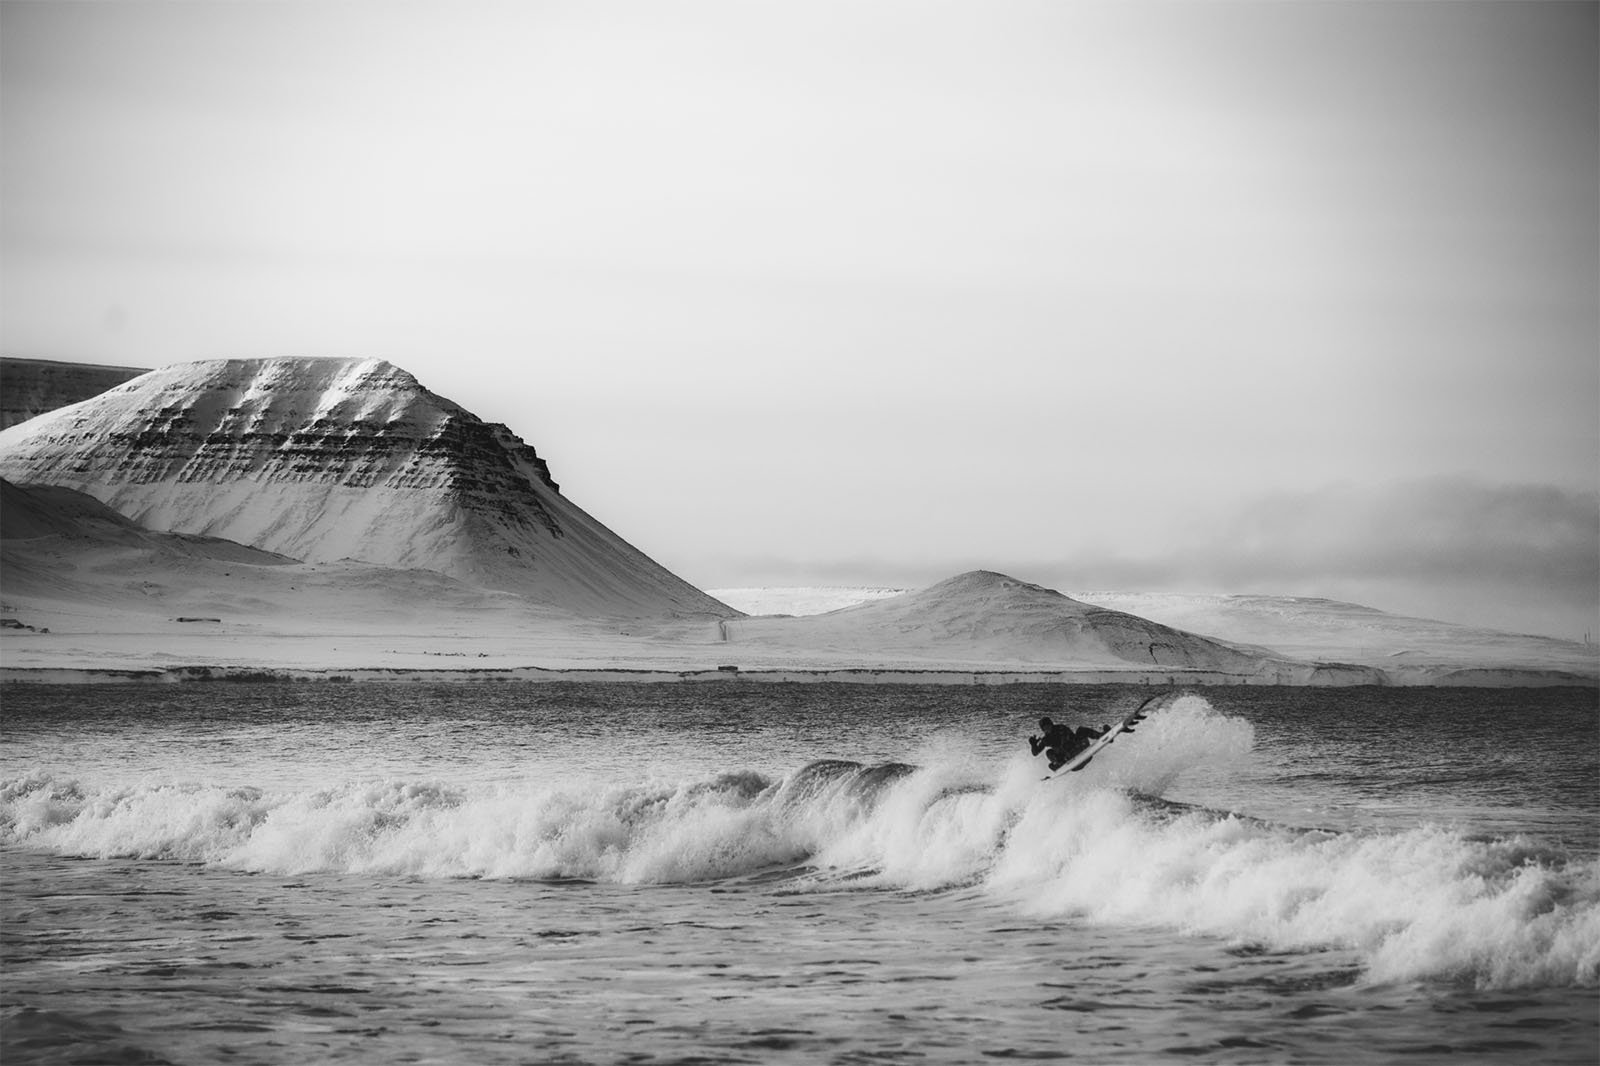 A surfer rides a wave in a cold, misty sea with snow-capped mountains in the background under an overcast sky.